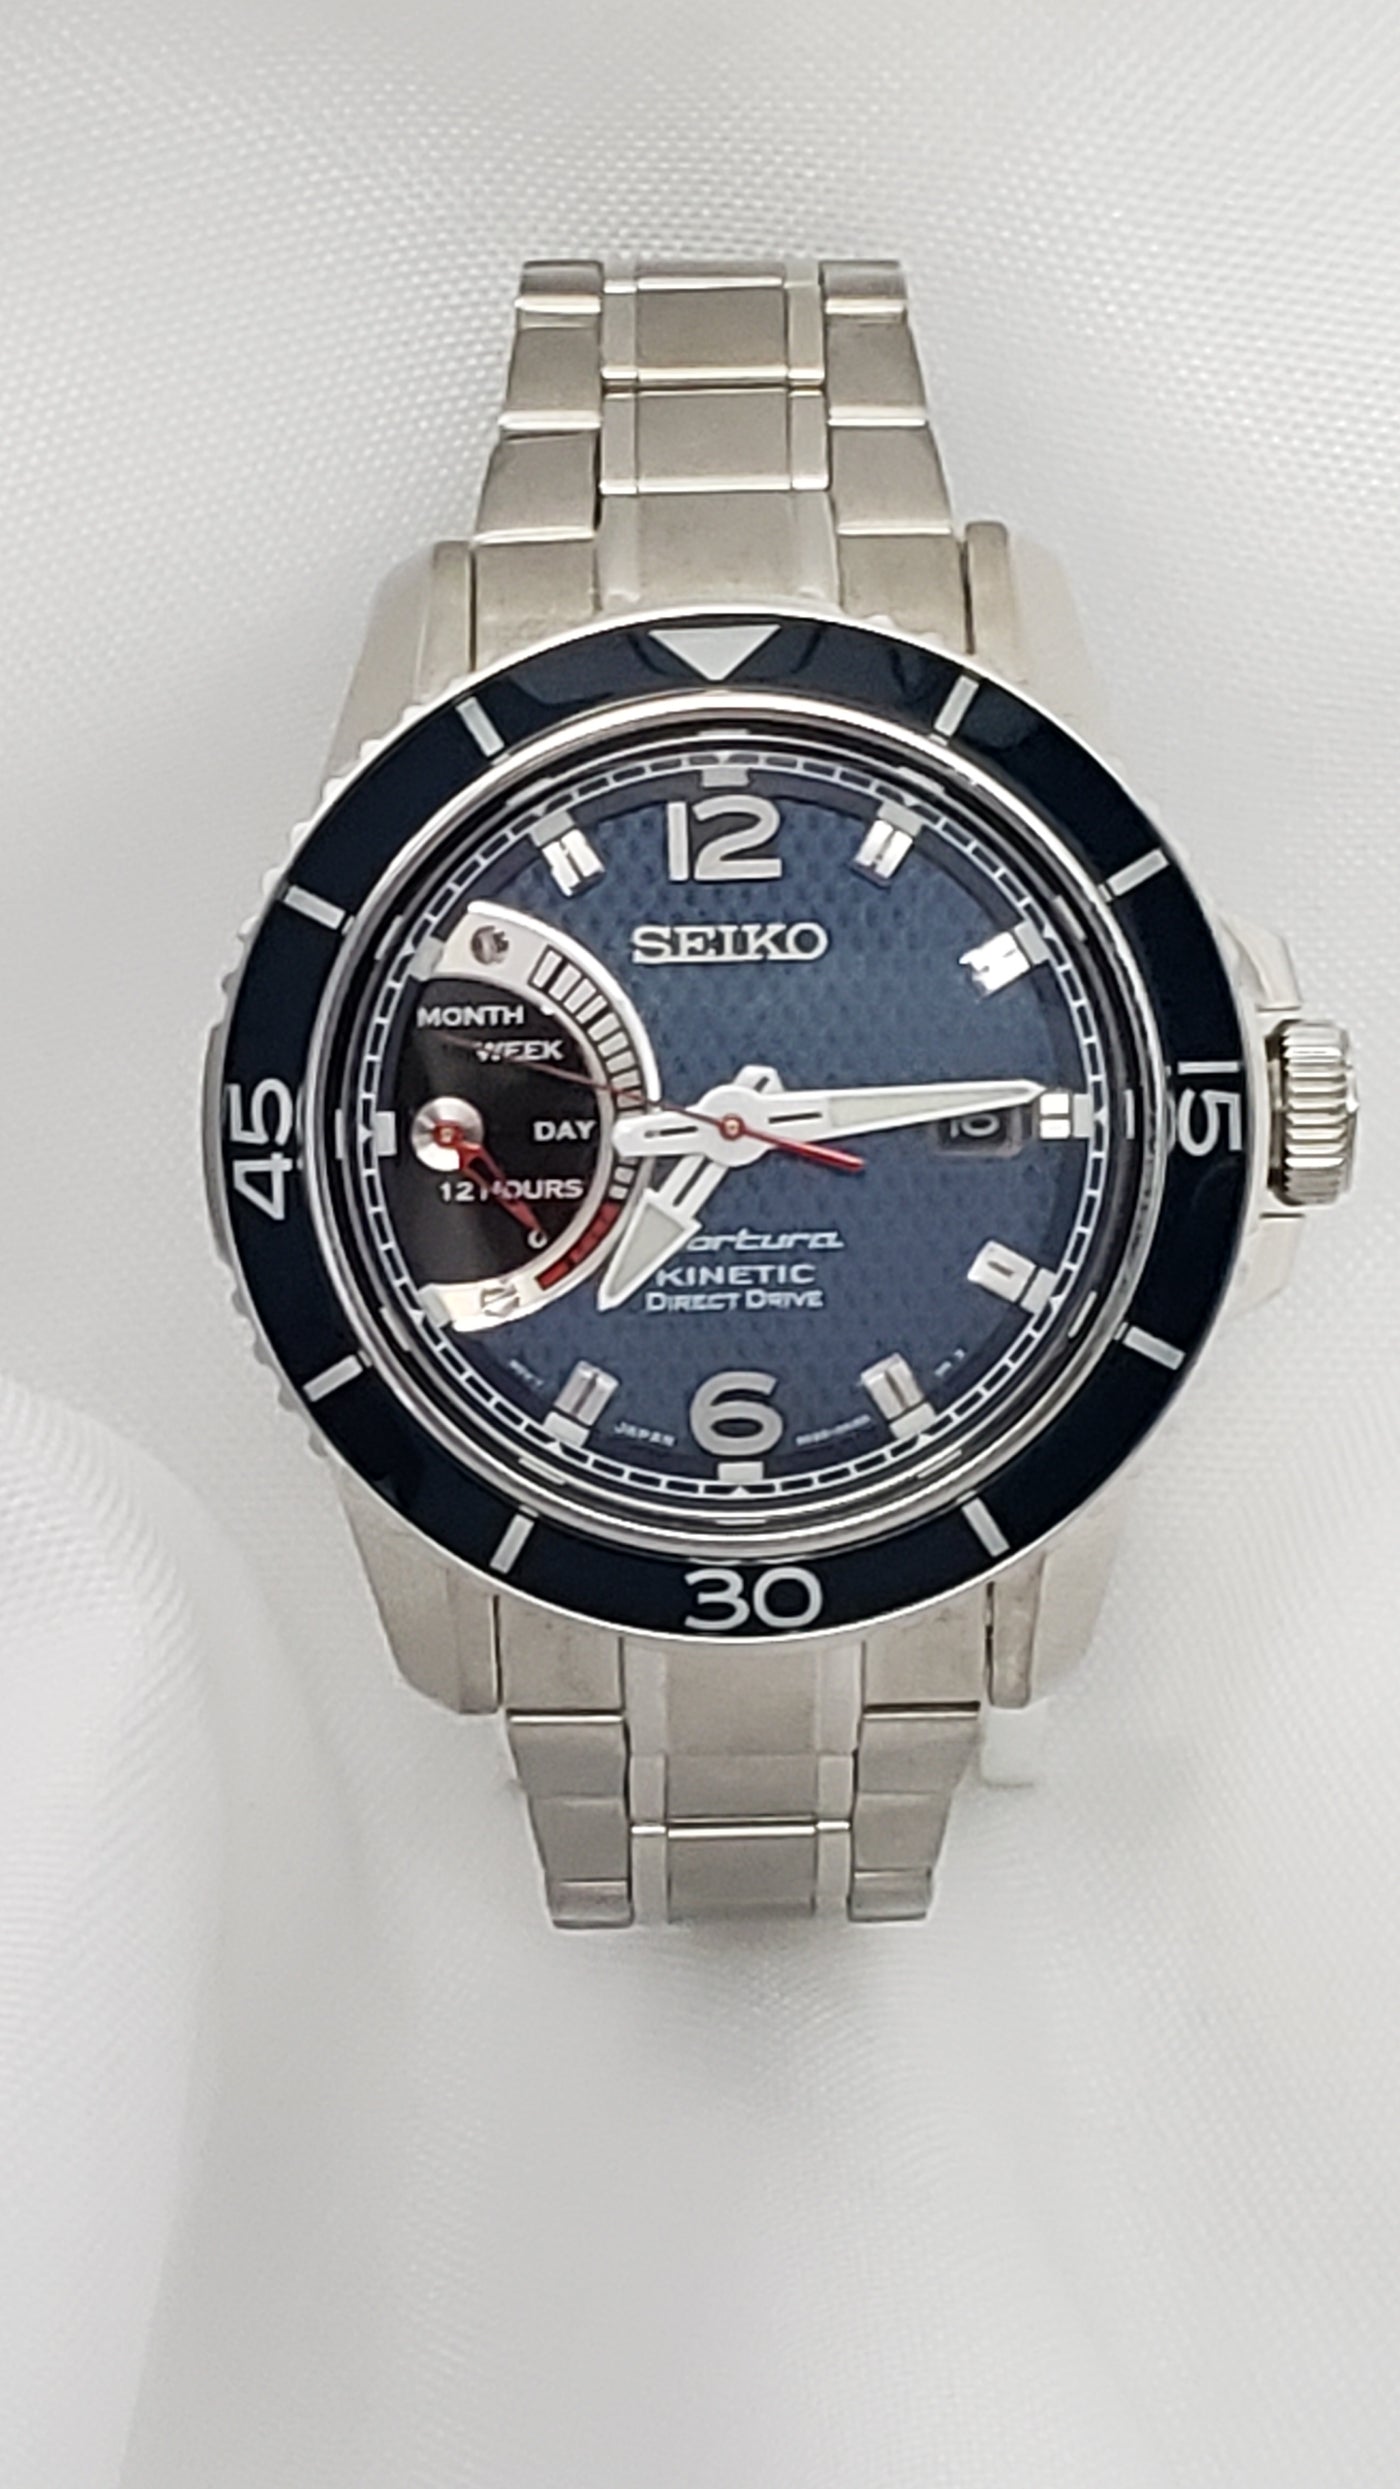 NEW Men's Kinetic Direct Silver Blue Dial Watch SRG01 CDMJewelry